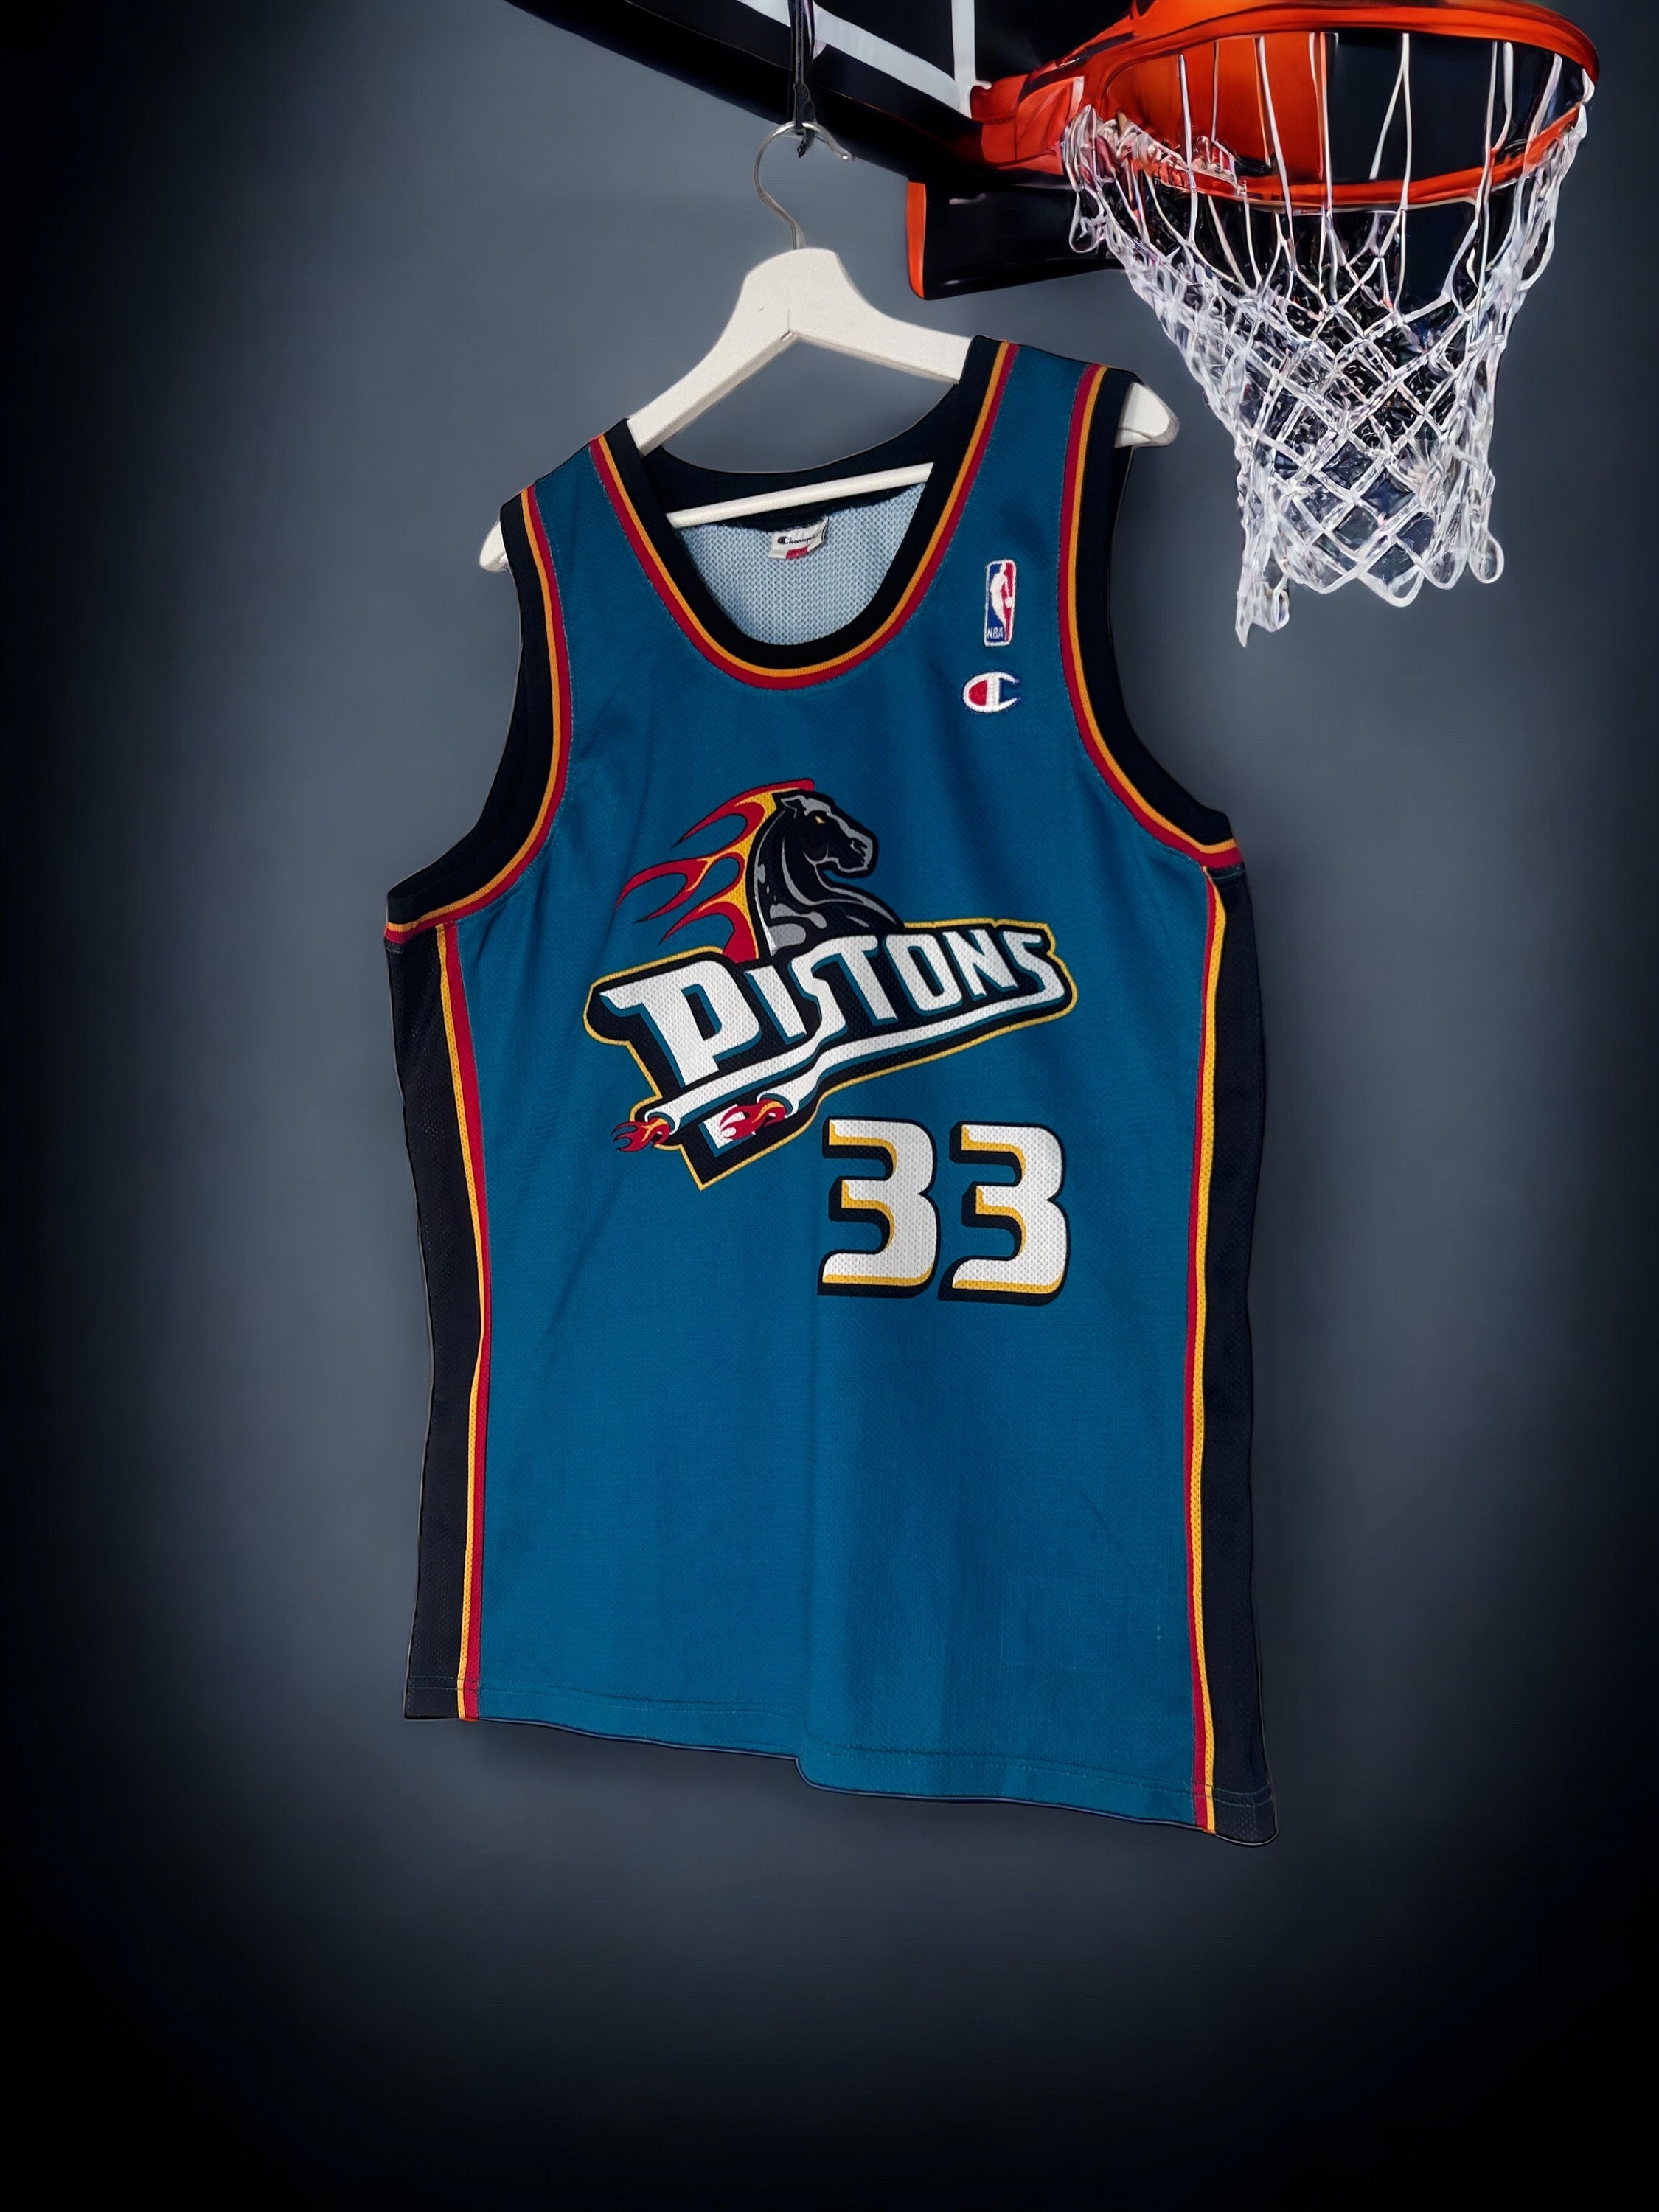 Pistons jersey concepts, do you like them? : r/DetroitPistons